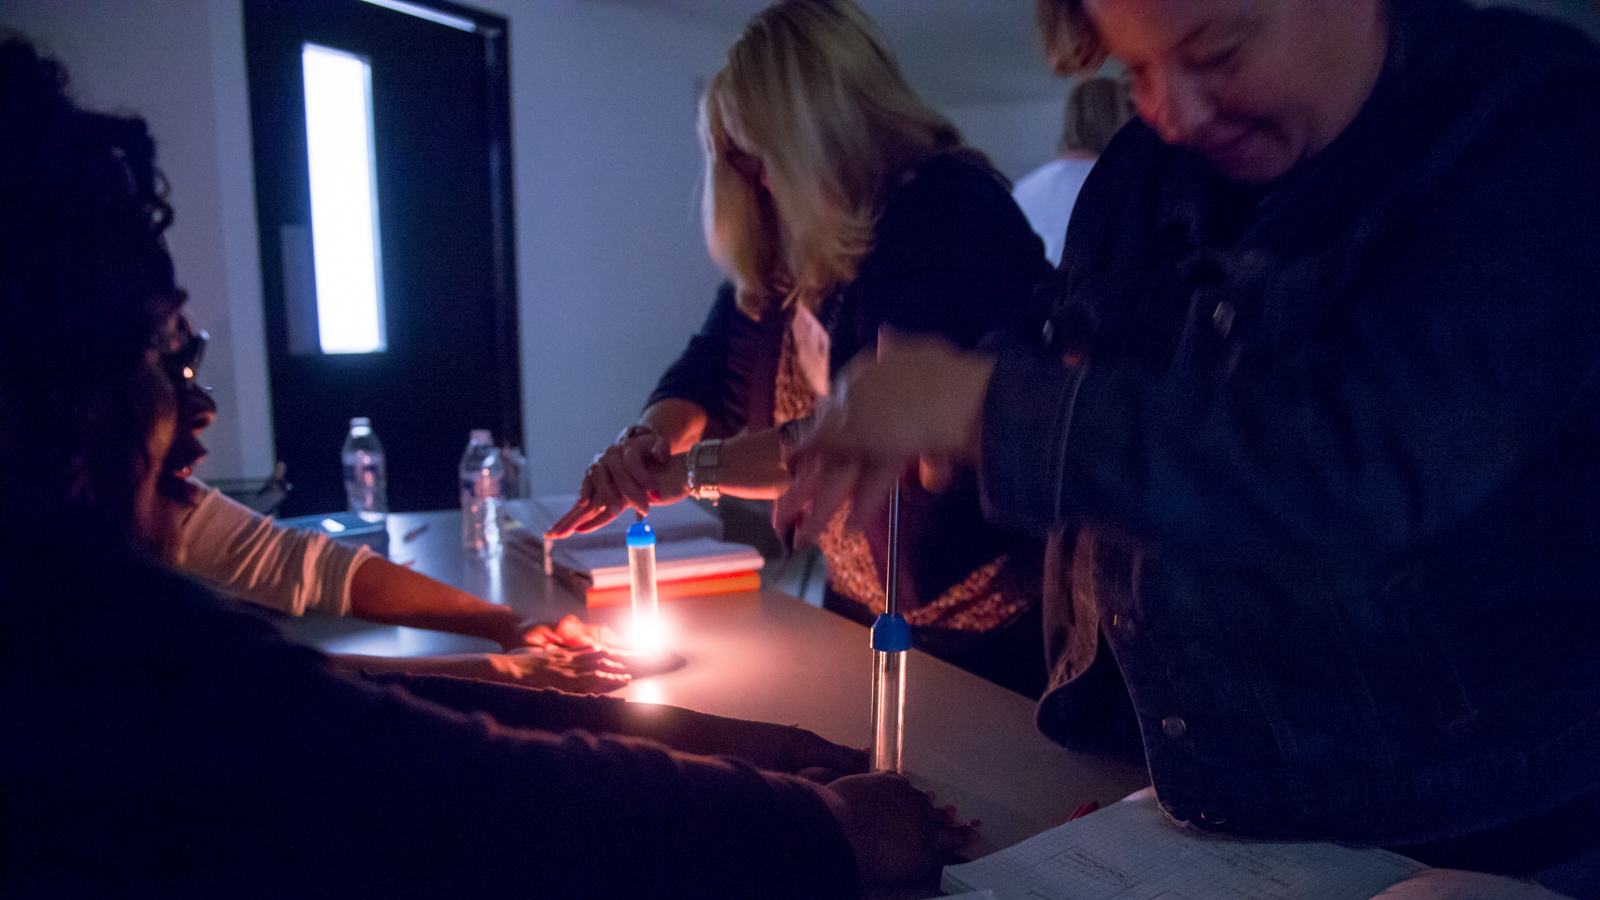 Science teachers at Argonne explore the science of pressure and combustion using fire syringes to simulate pistons in combustion engines. Photo credit: Mark Lopez, Argonne National Laboratory.